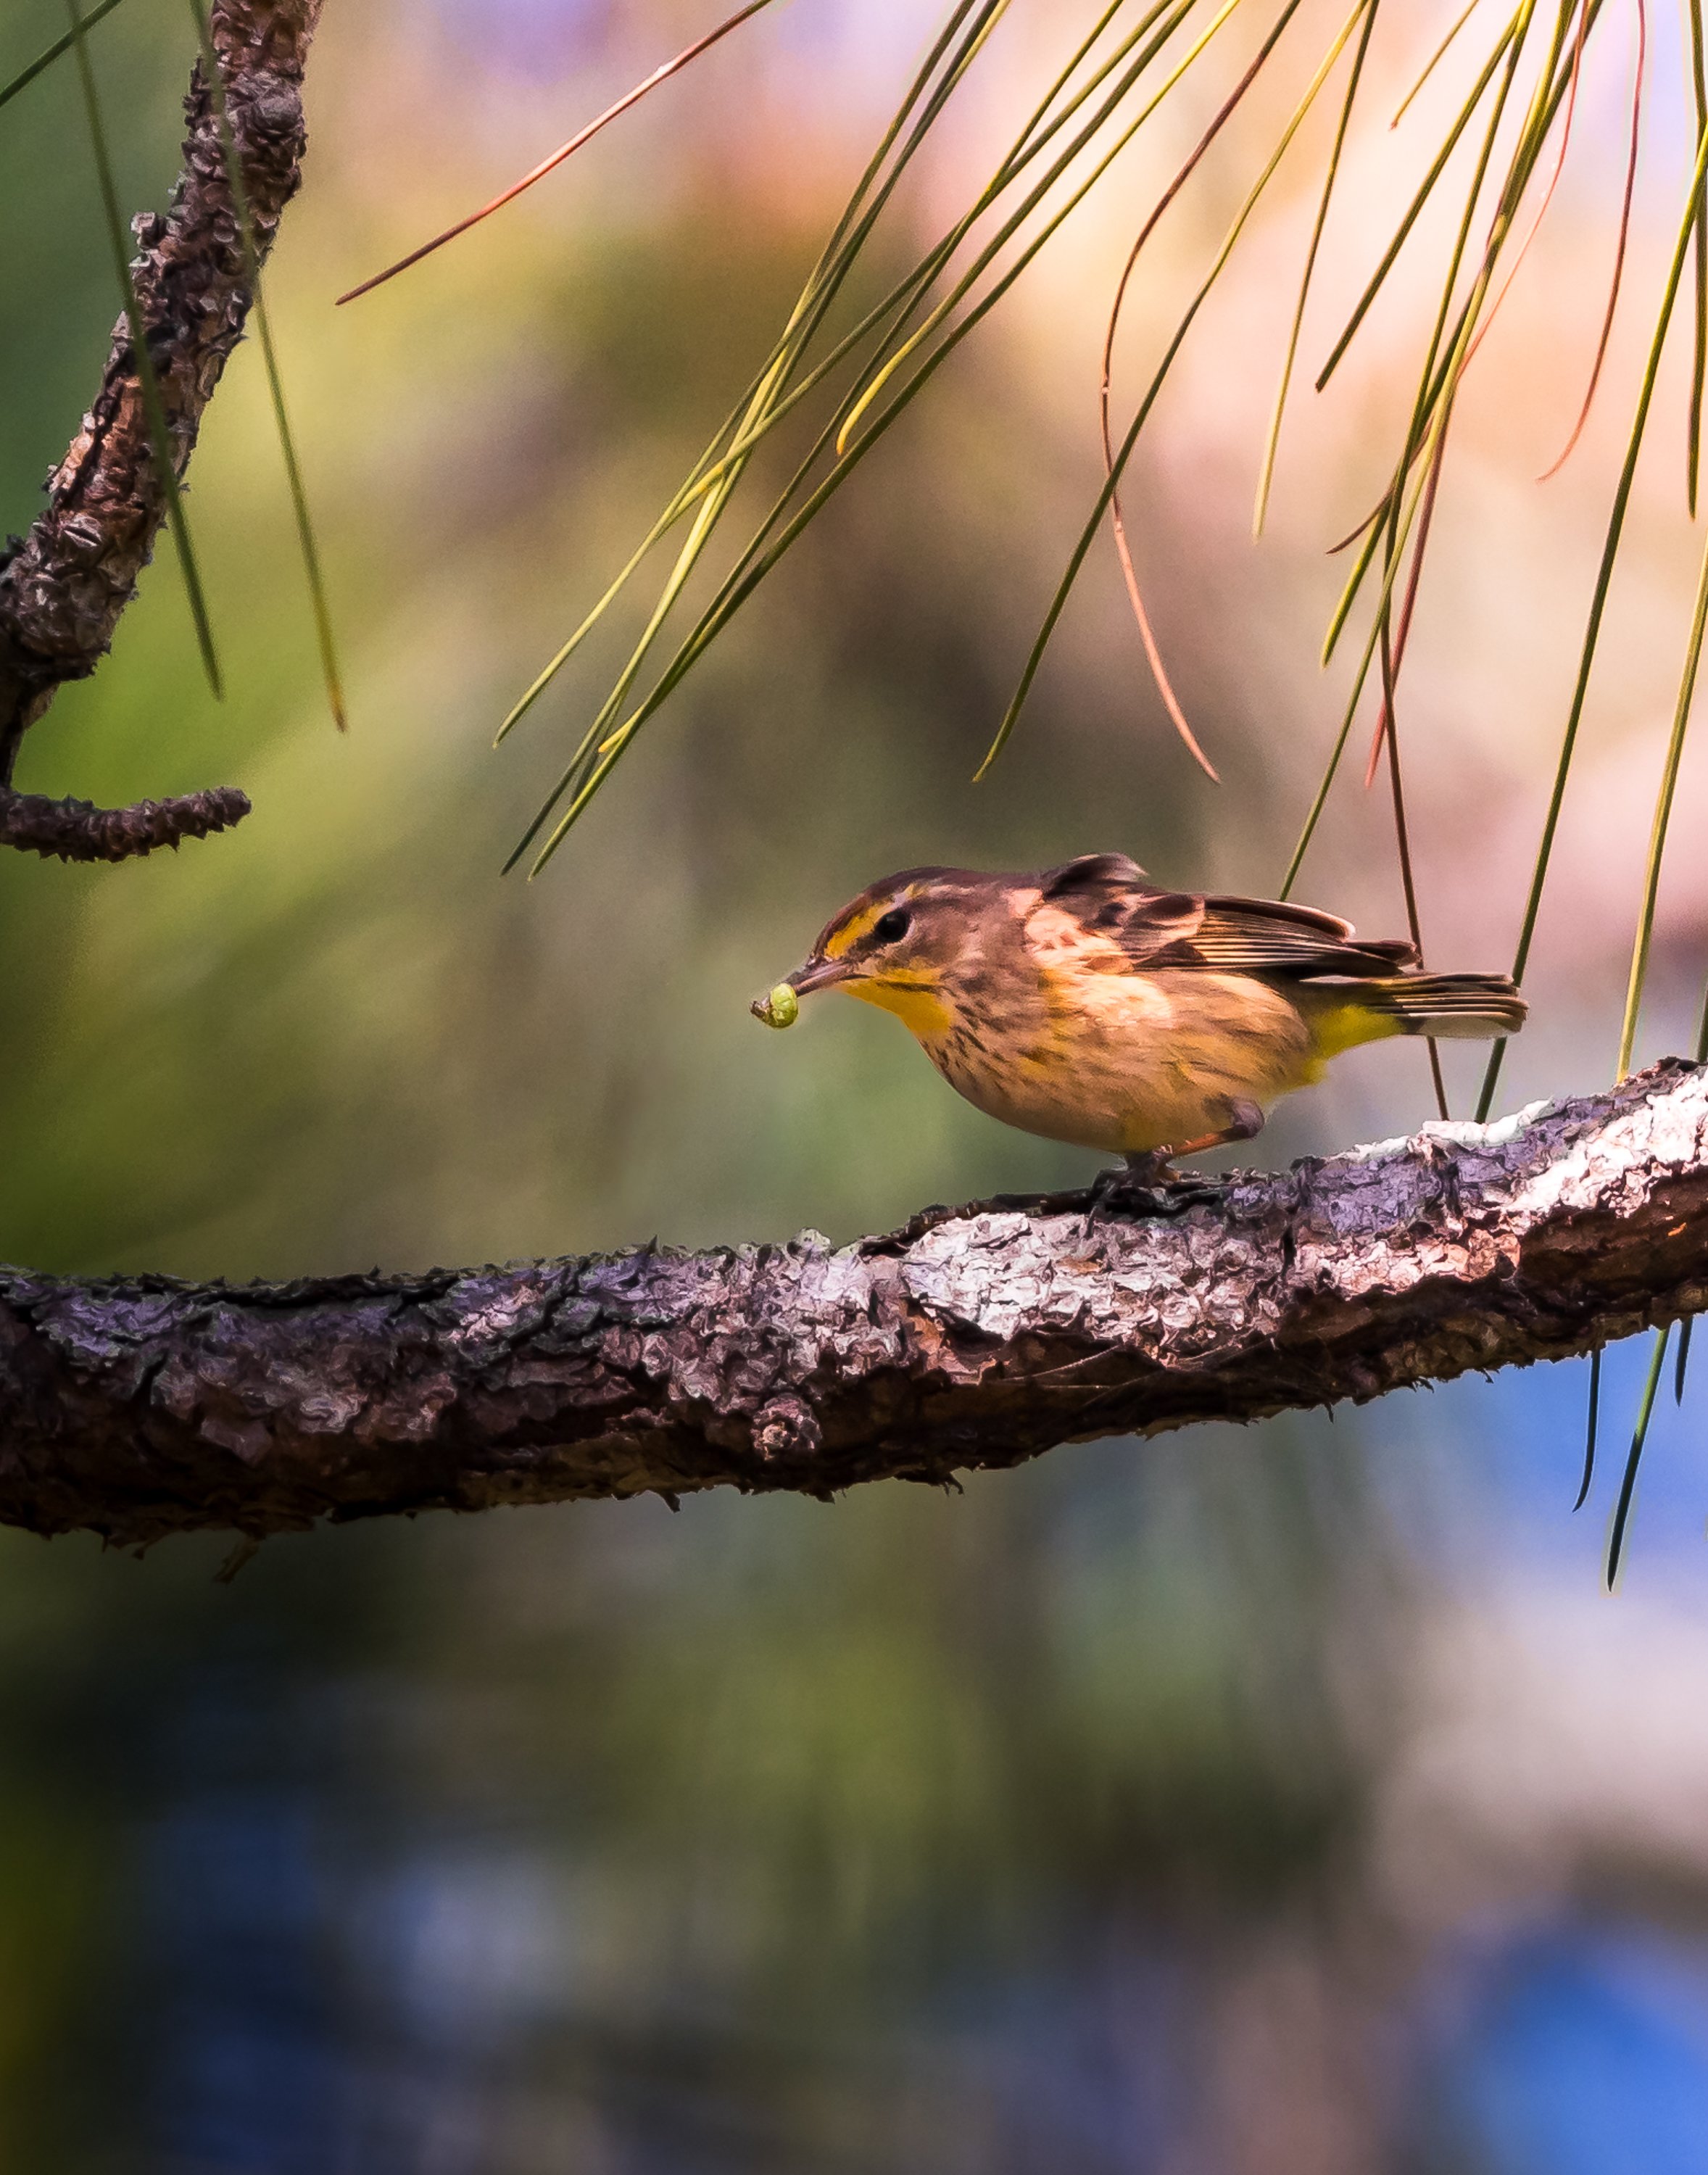 Palm Warbler eating a small green larvae.